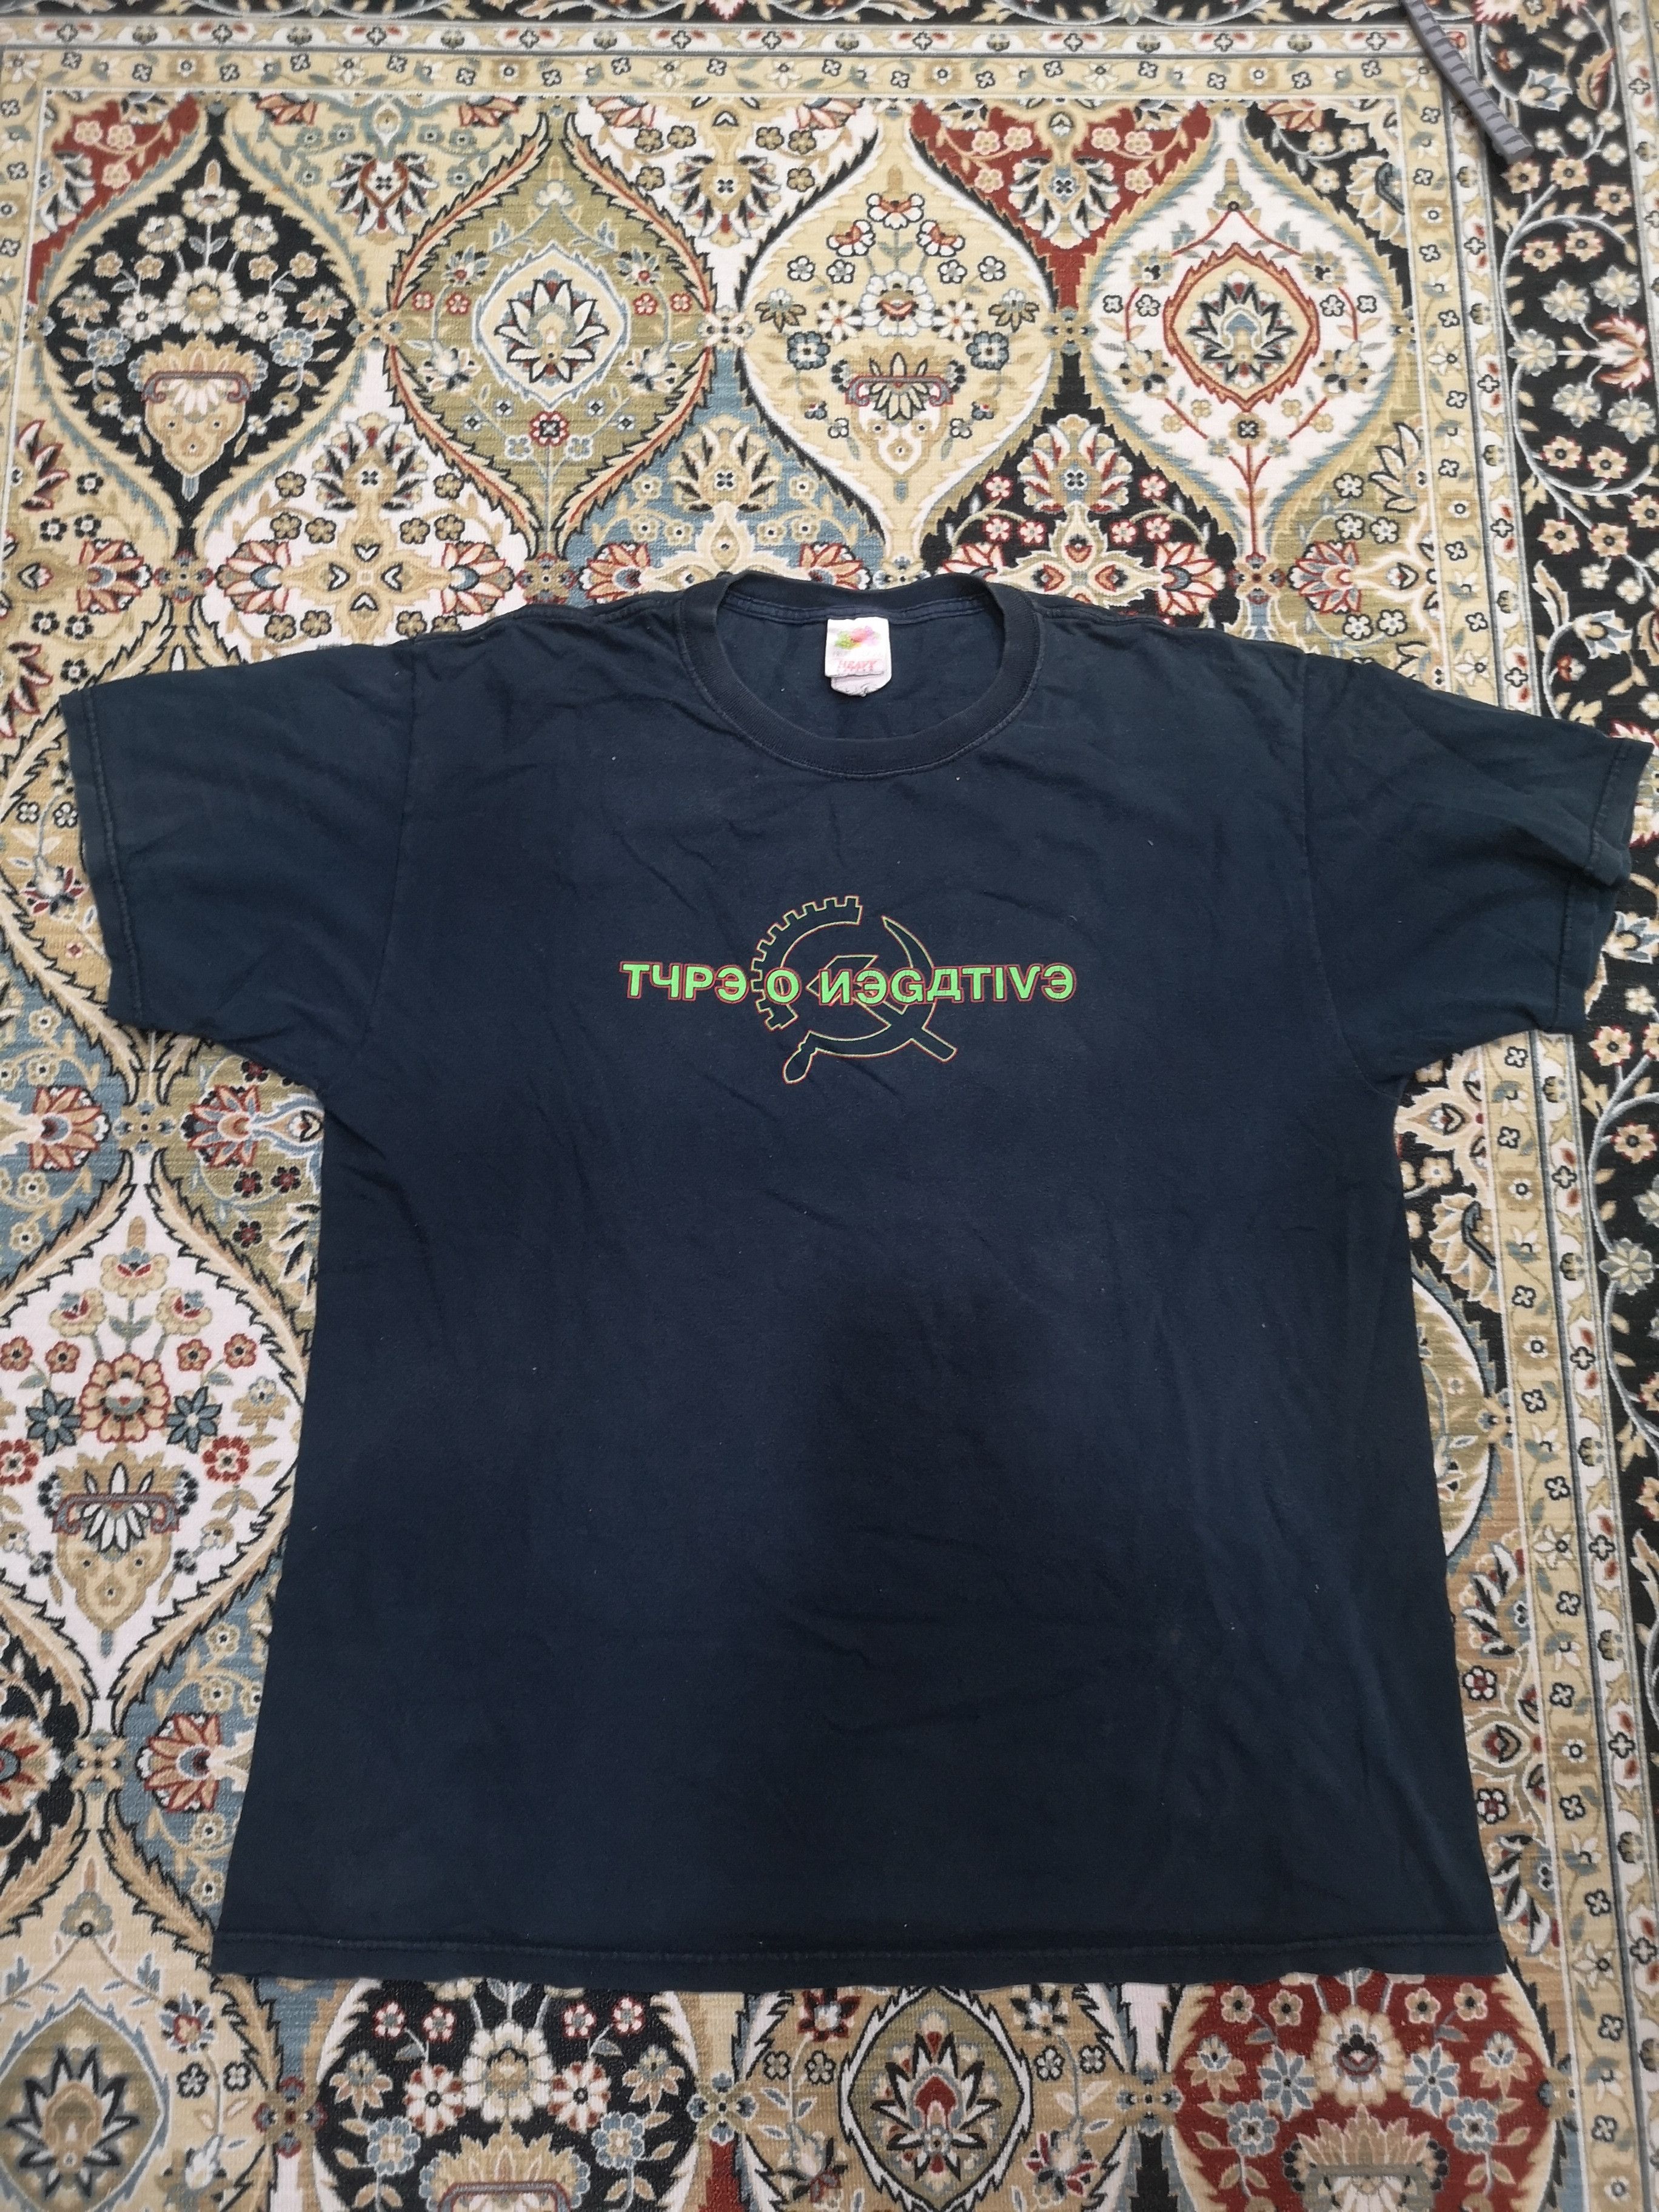 Pre-owned Band Tees X Vintage 90's Type O Negative Tee In Black